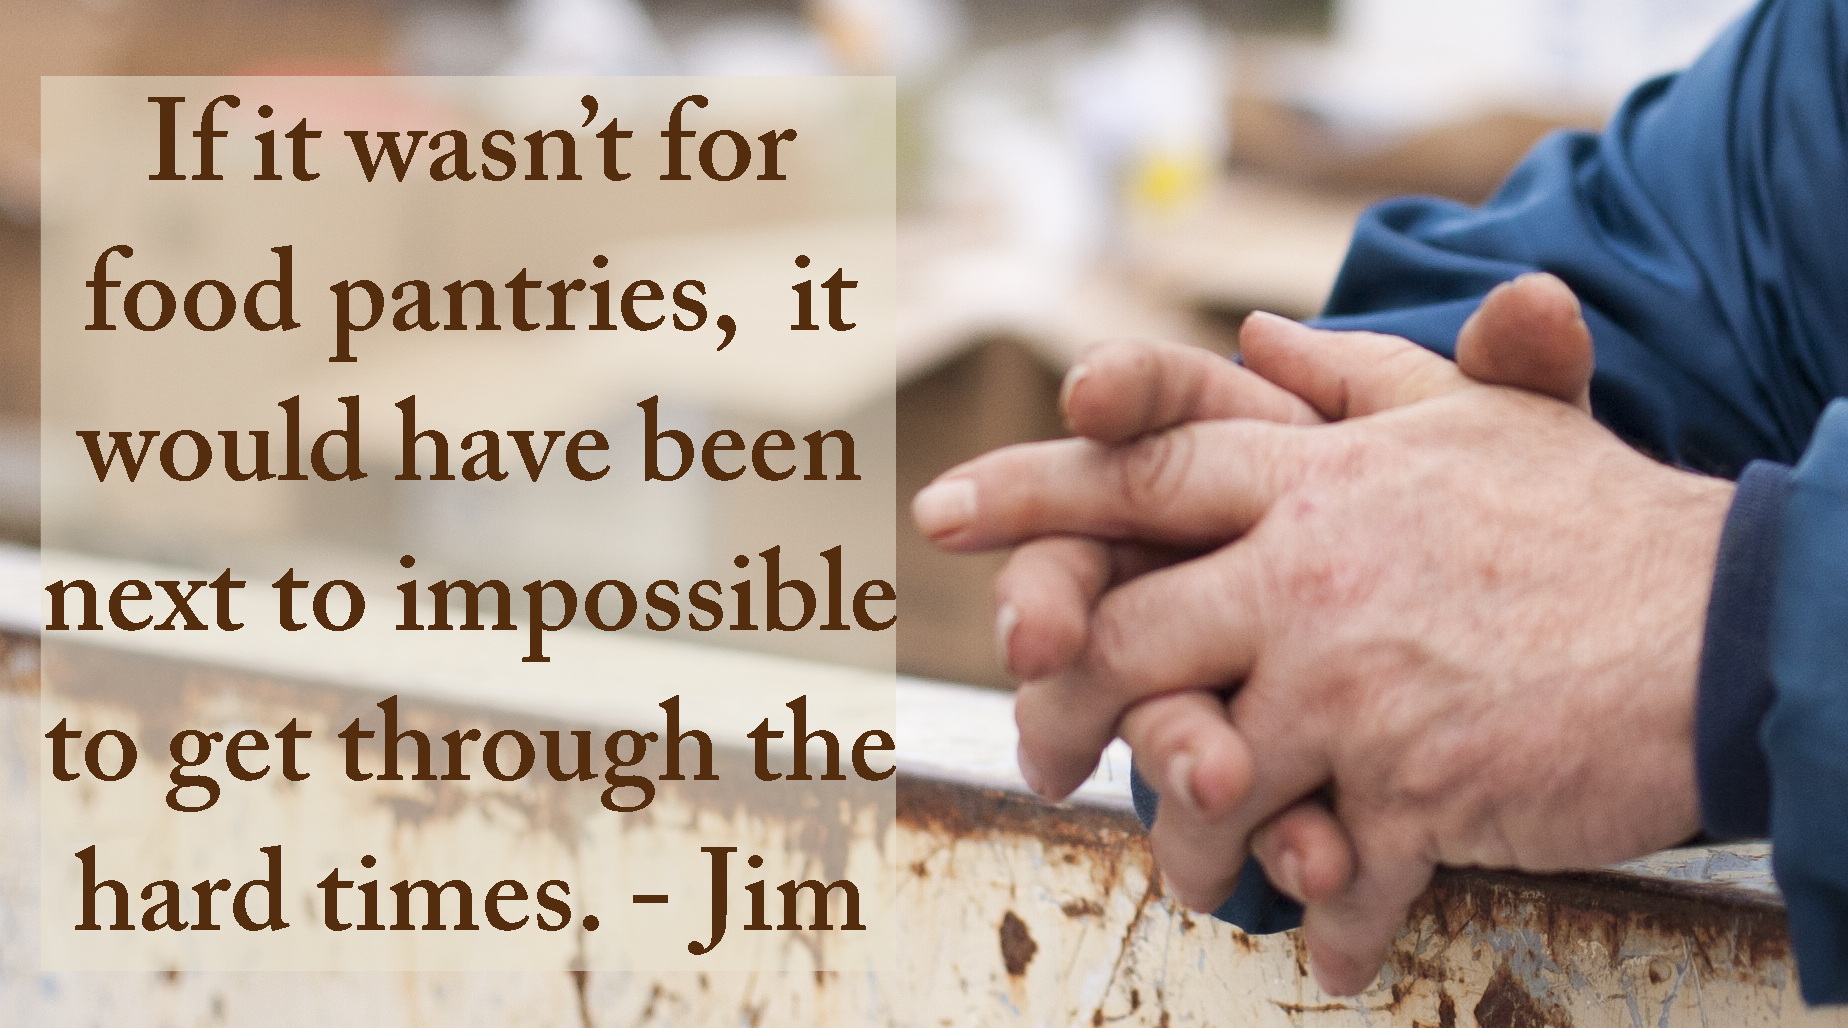 If it wasn't for food pantries, it would have been next to impossible to get through the hard times. - Jim